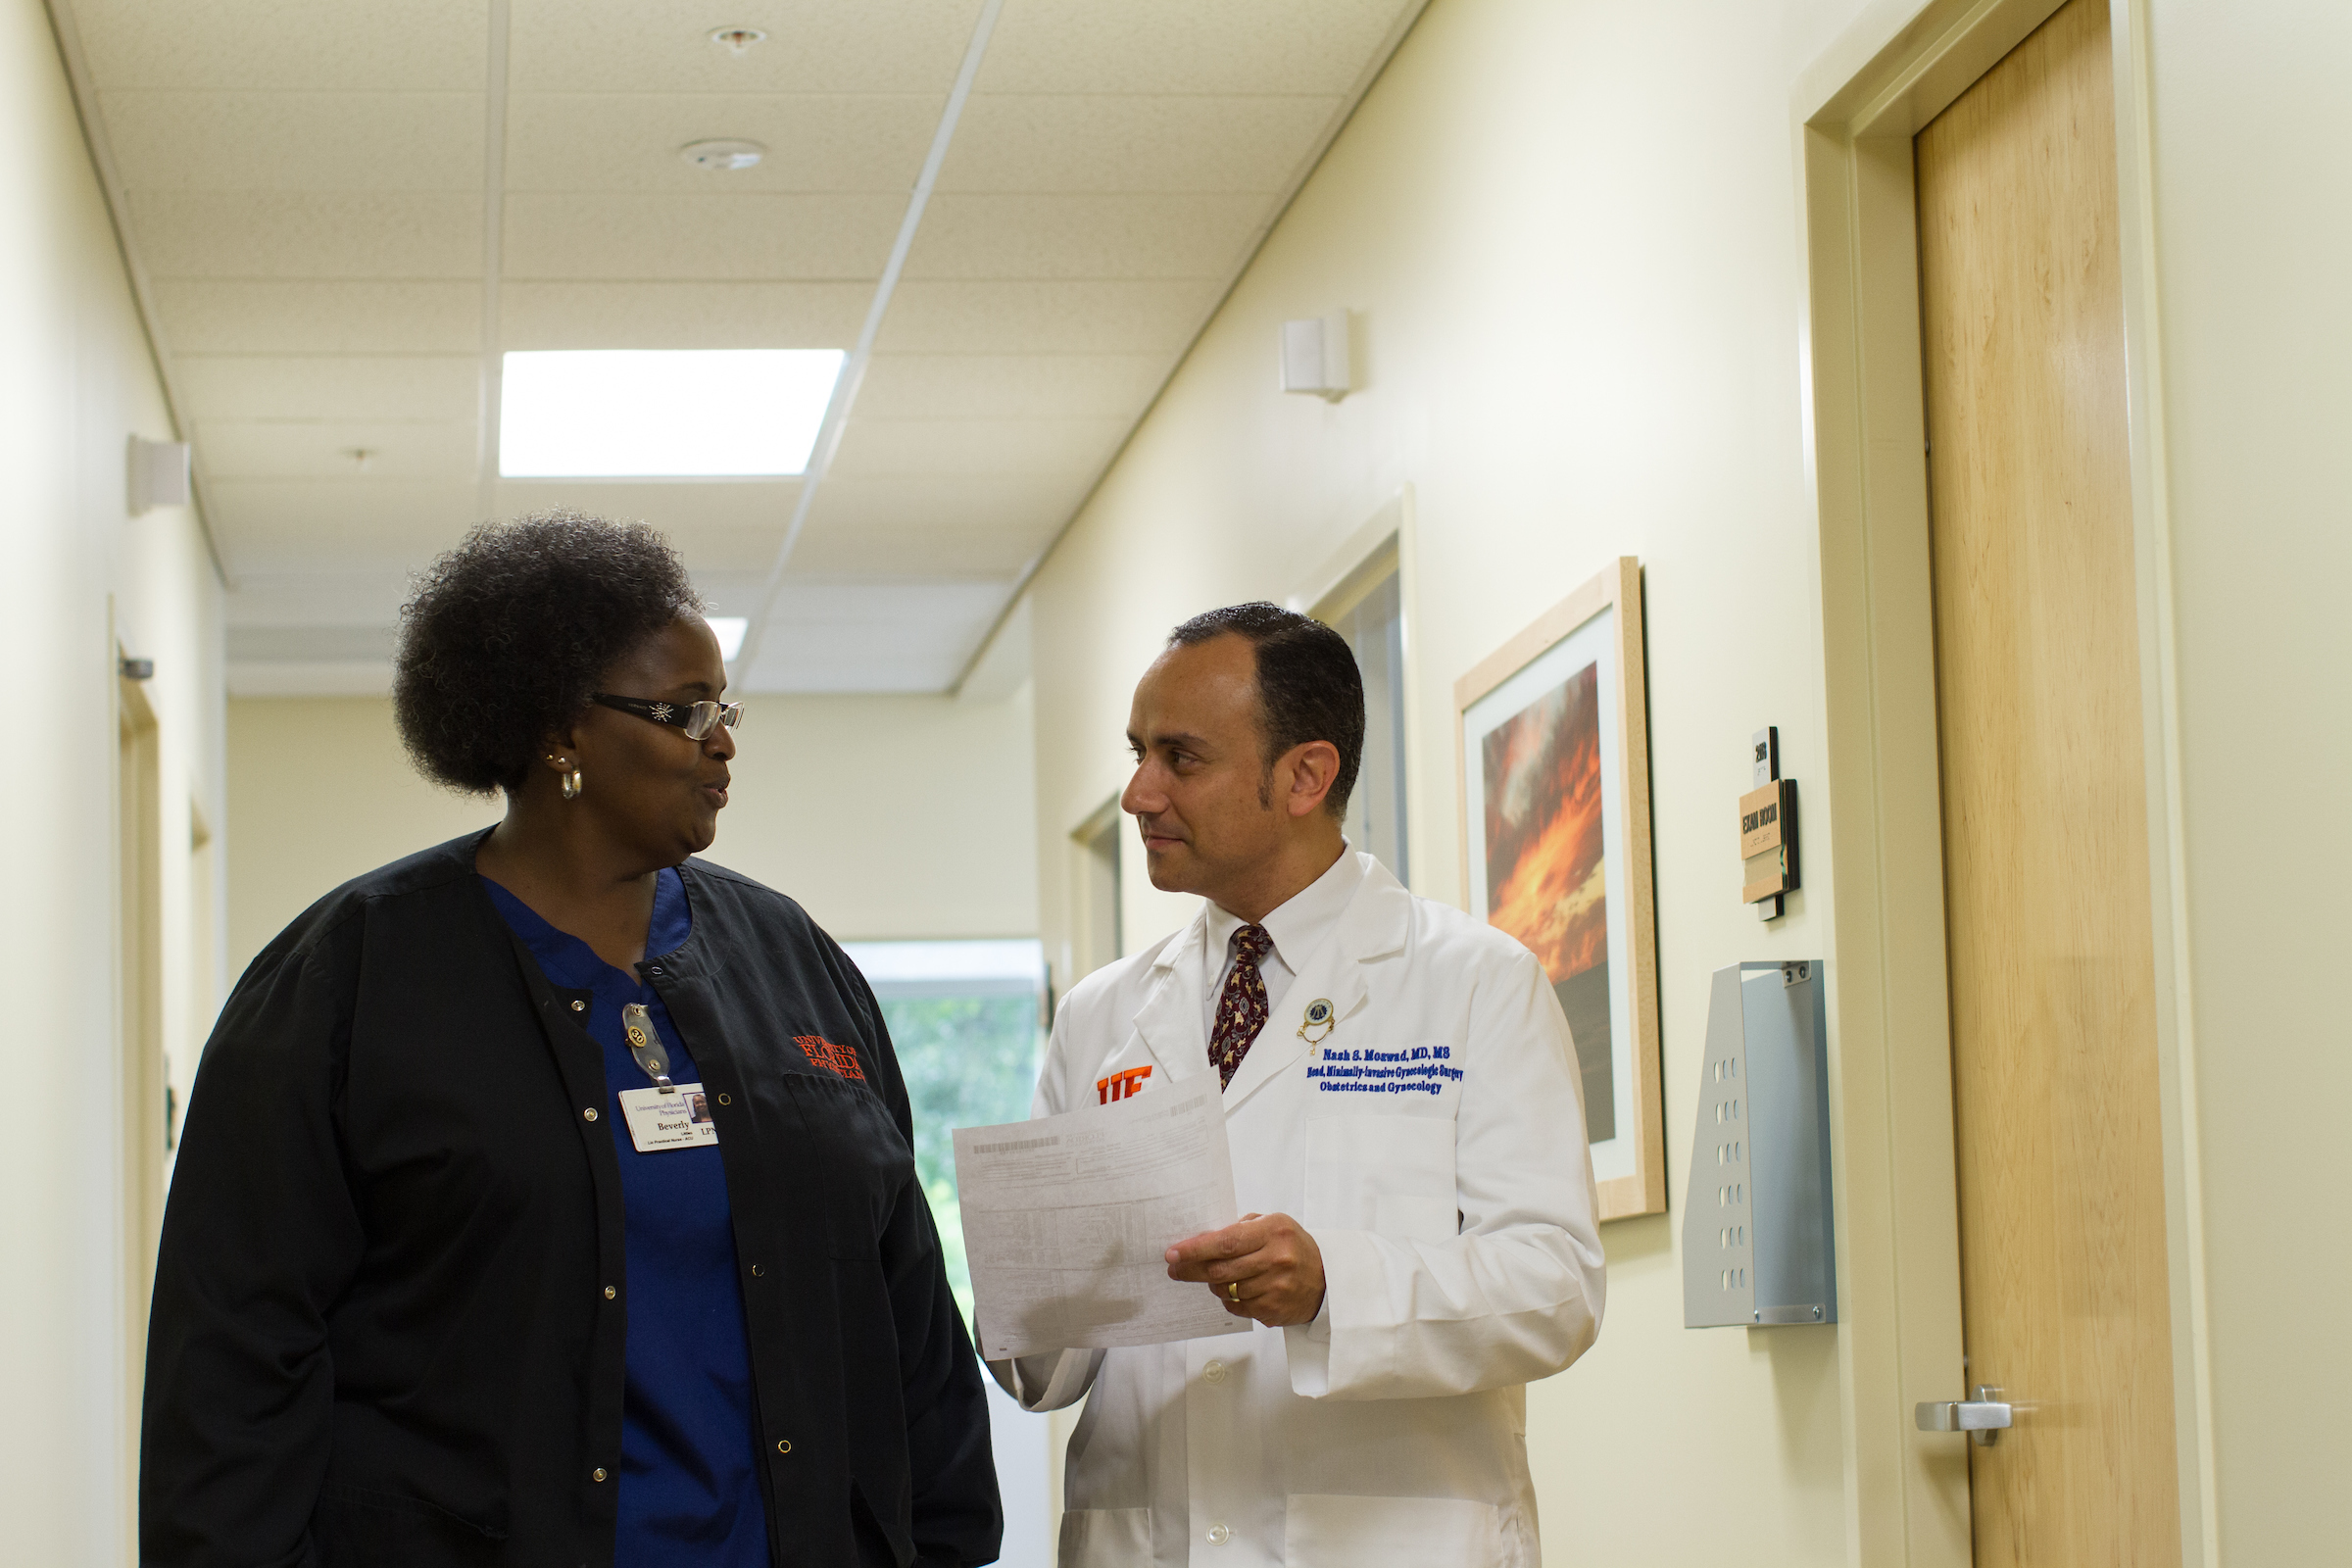 Nash Moawad, M.D., speaking with a fellow staff member.